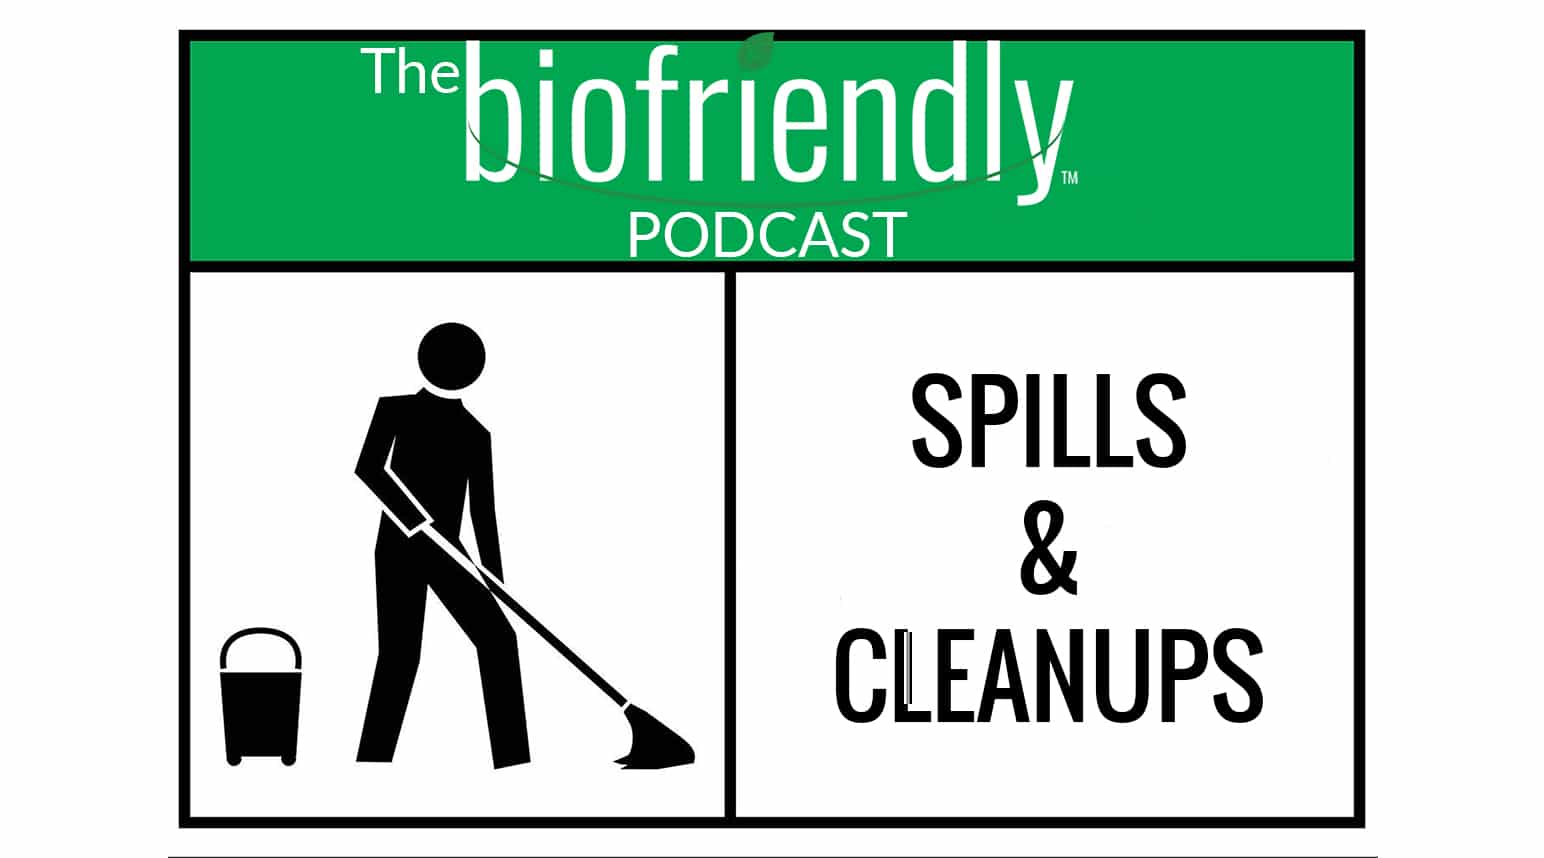 The Biofriendly Podcast - Episode 4 - Spills and Cleanups